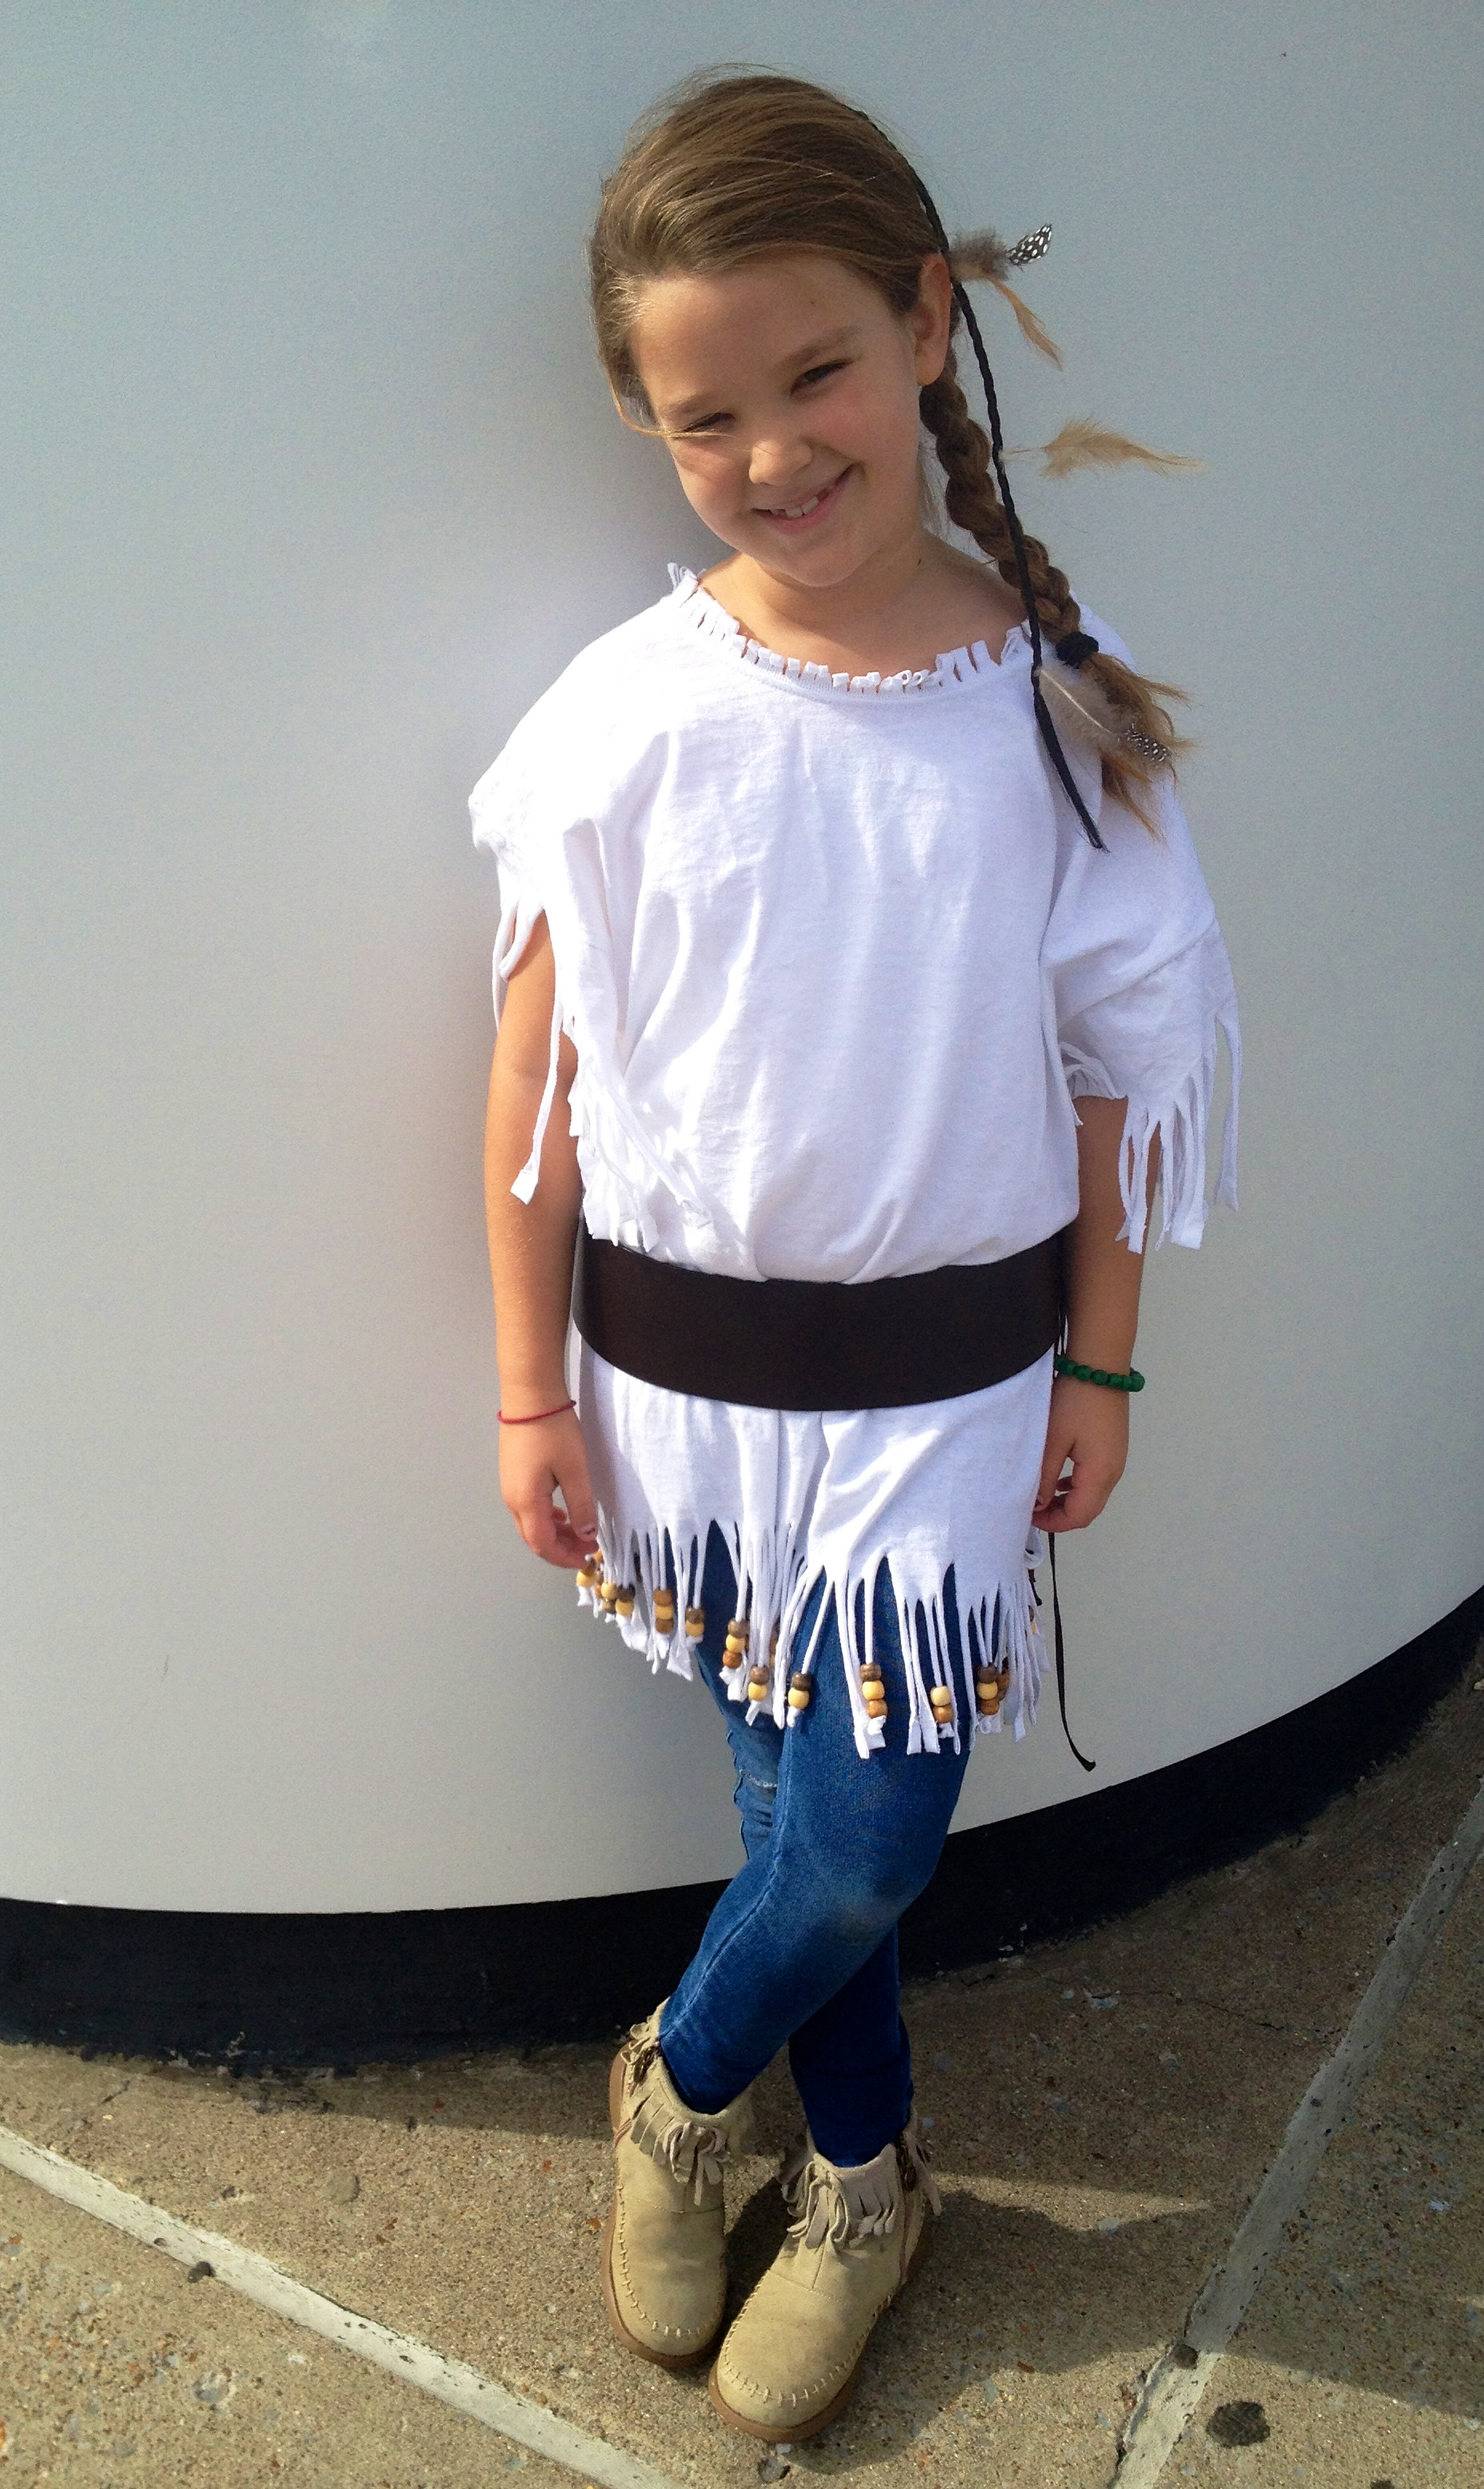 DIY Costume For Girls
 Girls Indian Costume Homemade by Daddy